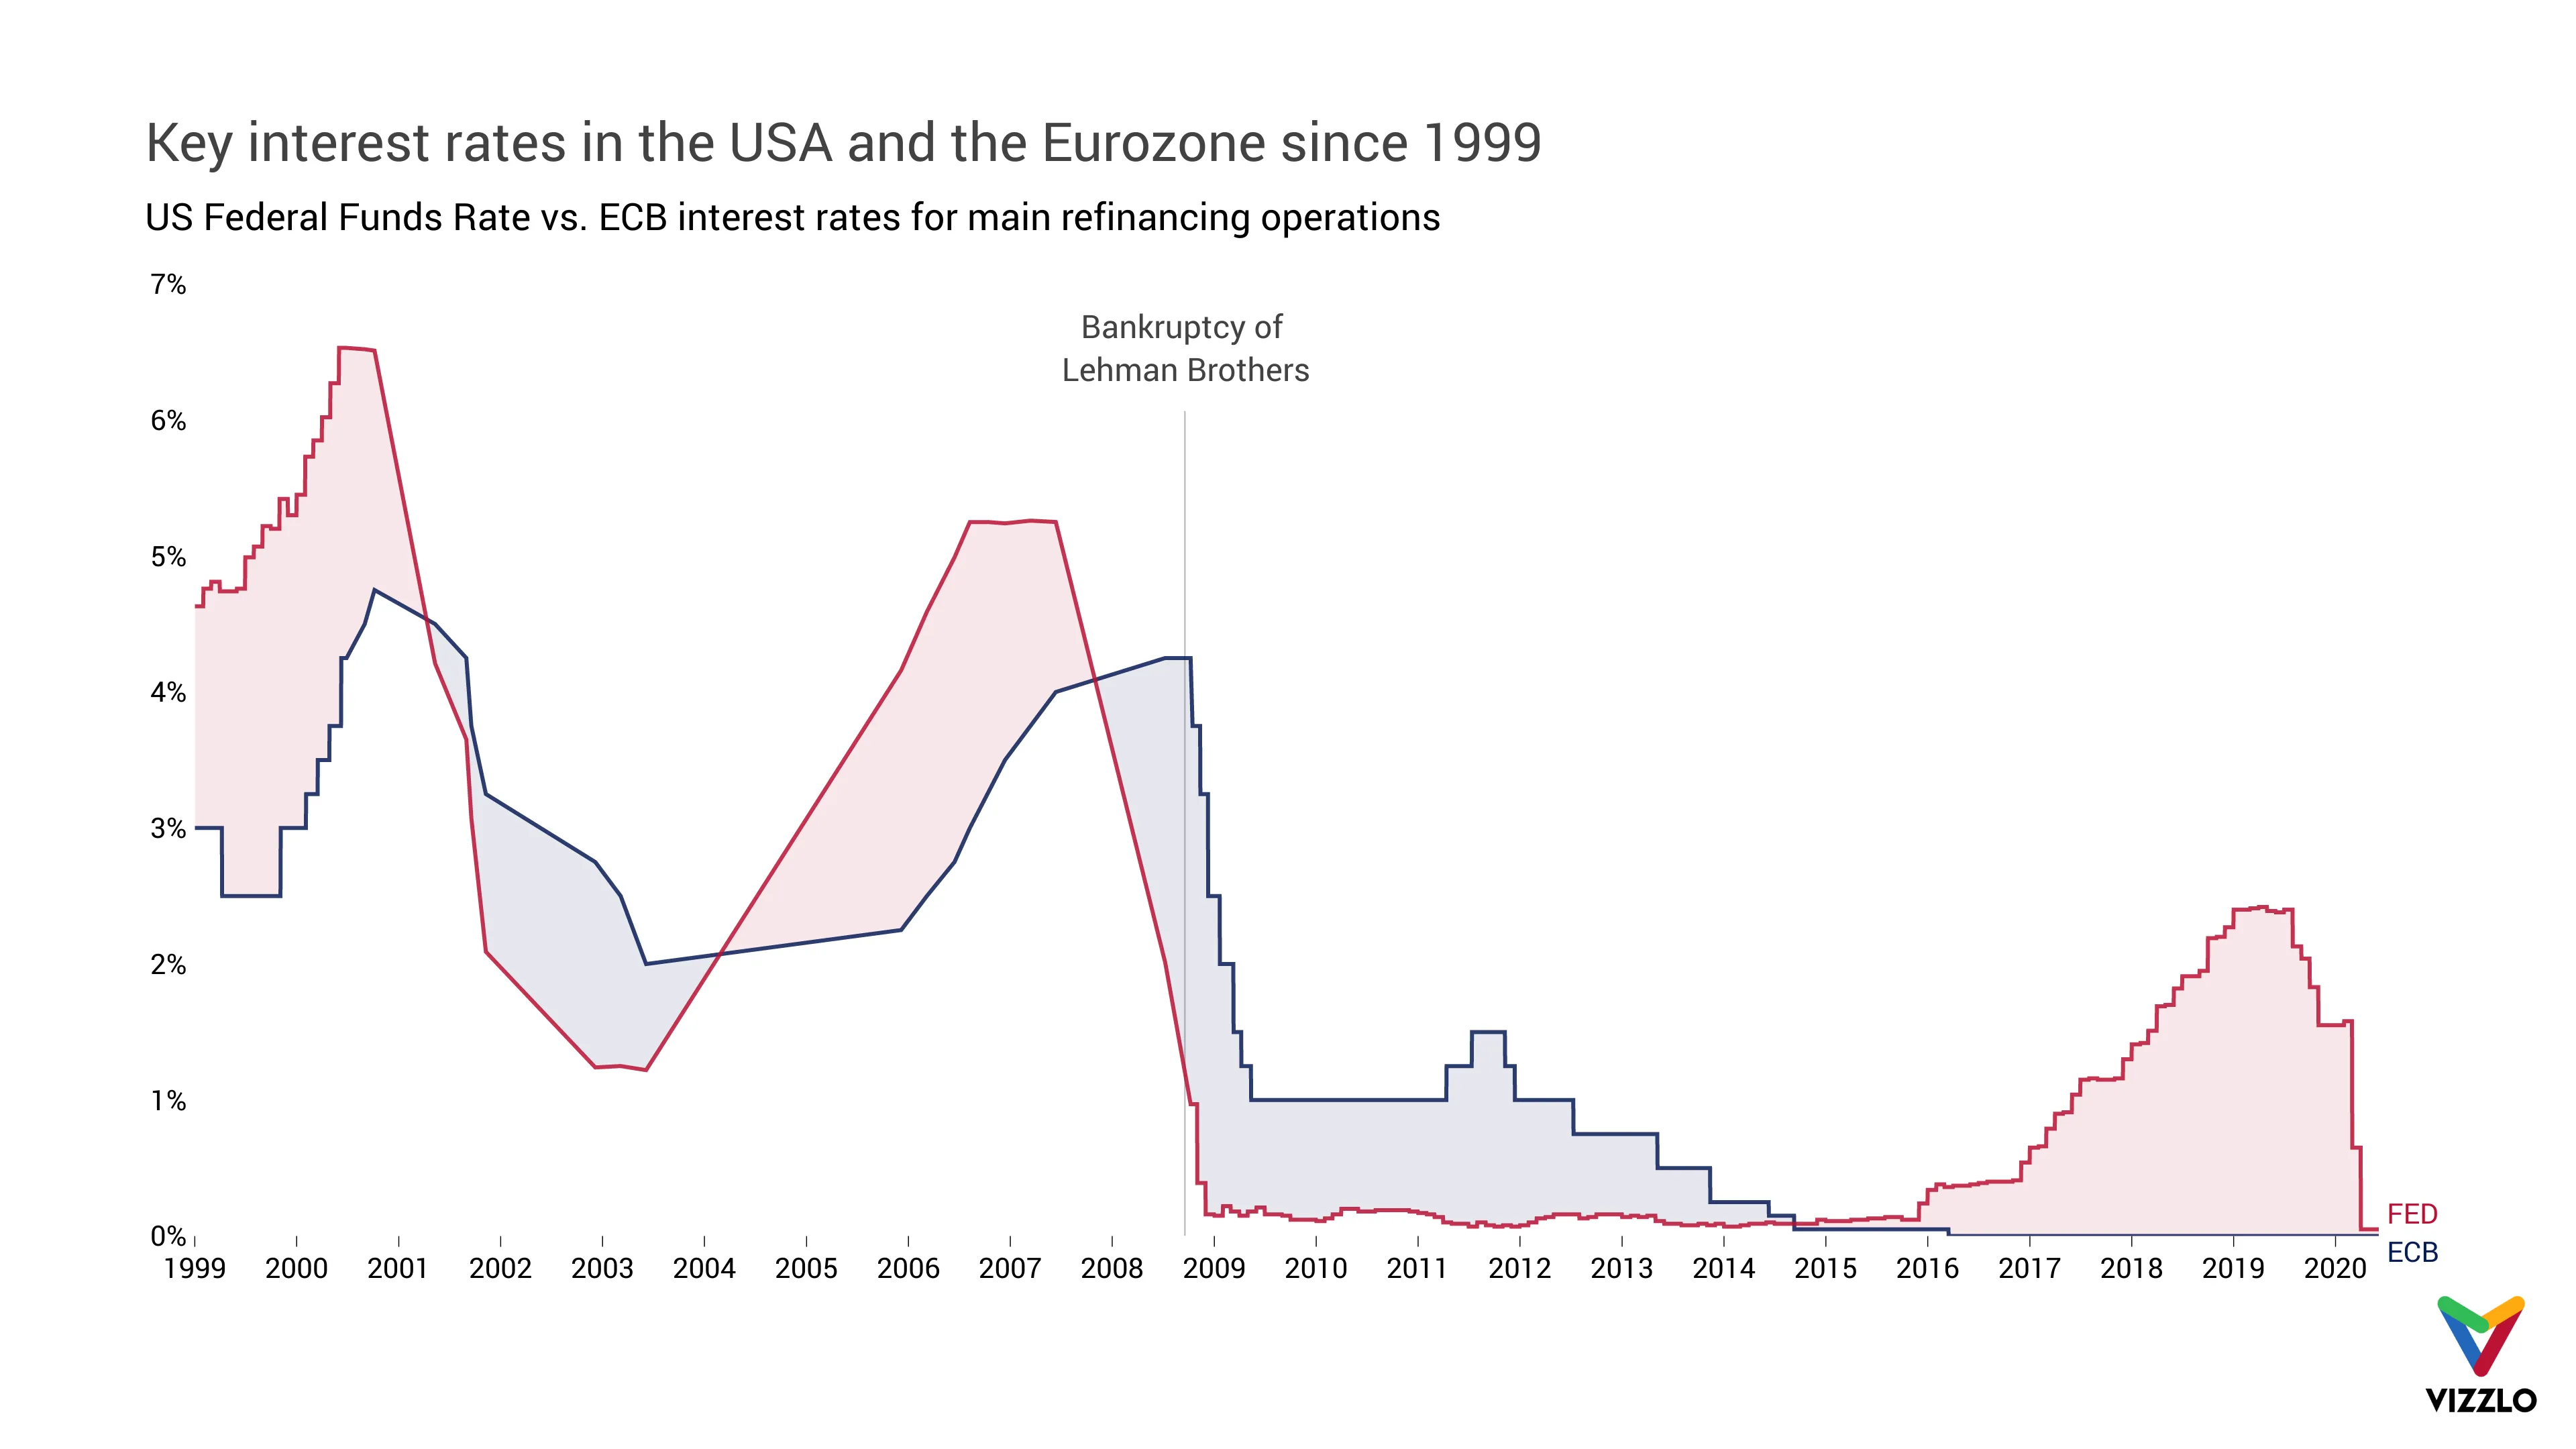 Key interest rates in the USA and the Eurozone since 1999